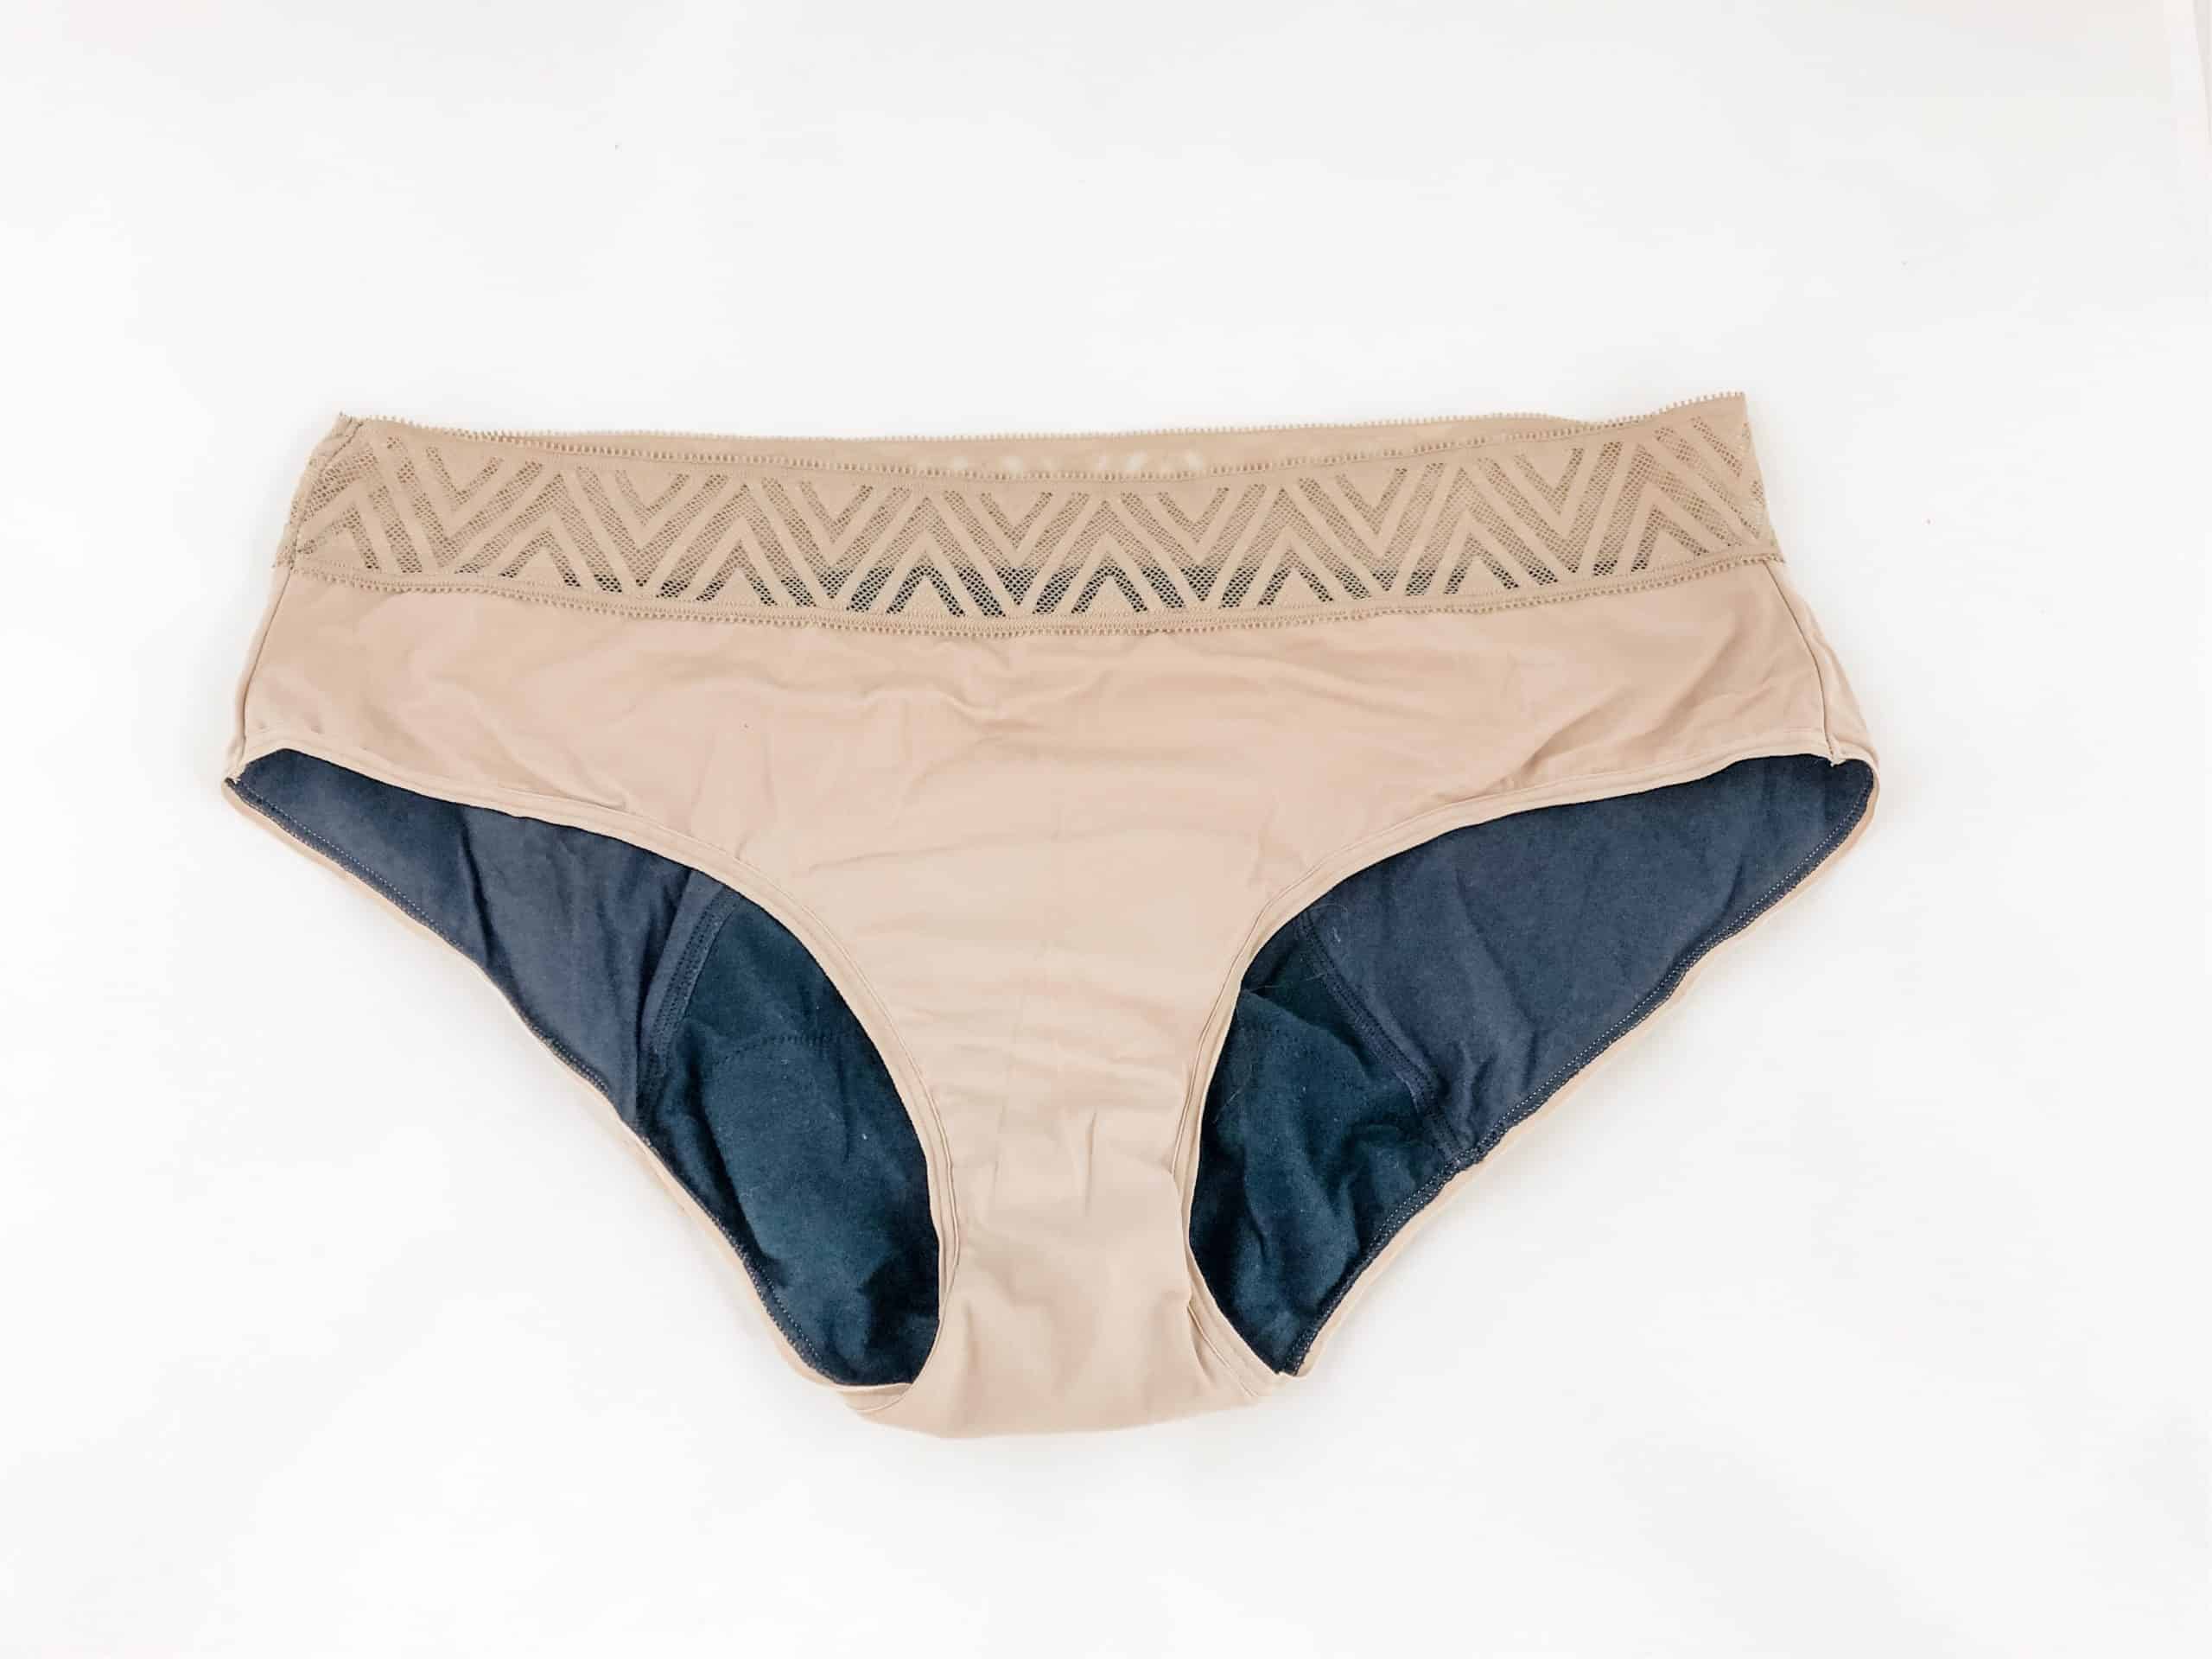 Safest Period Underwear Tested for Indications of PFAS -- Guide